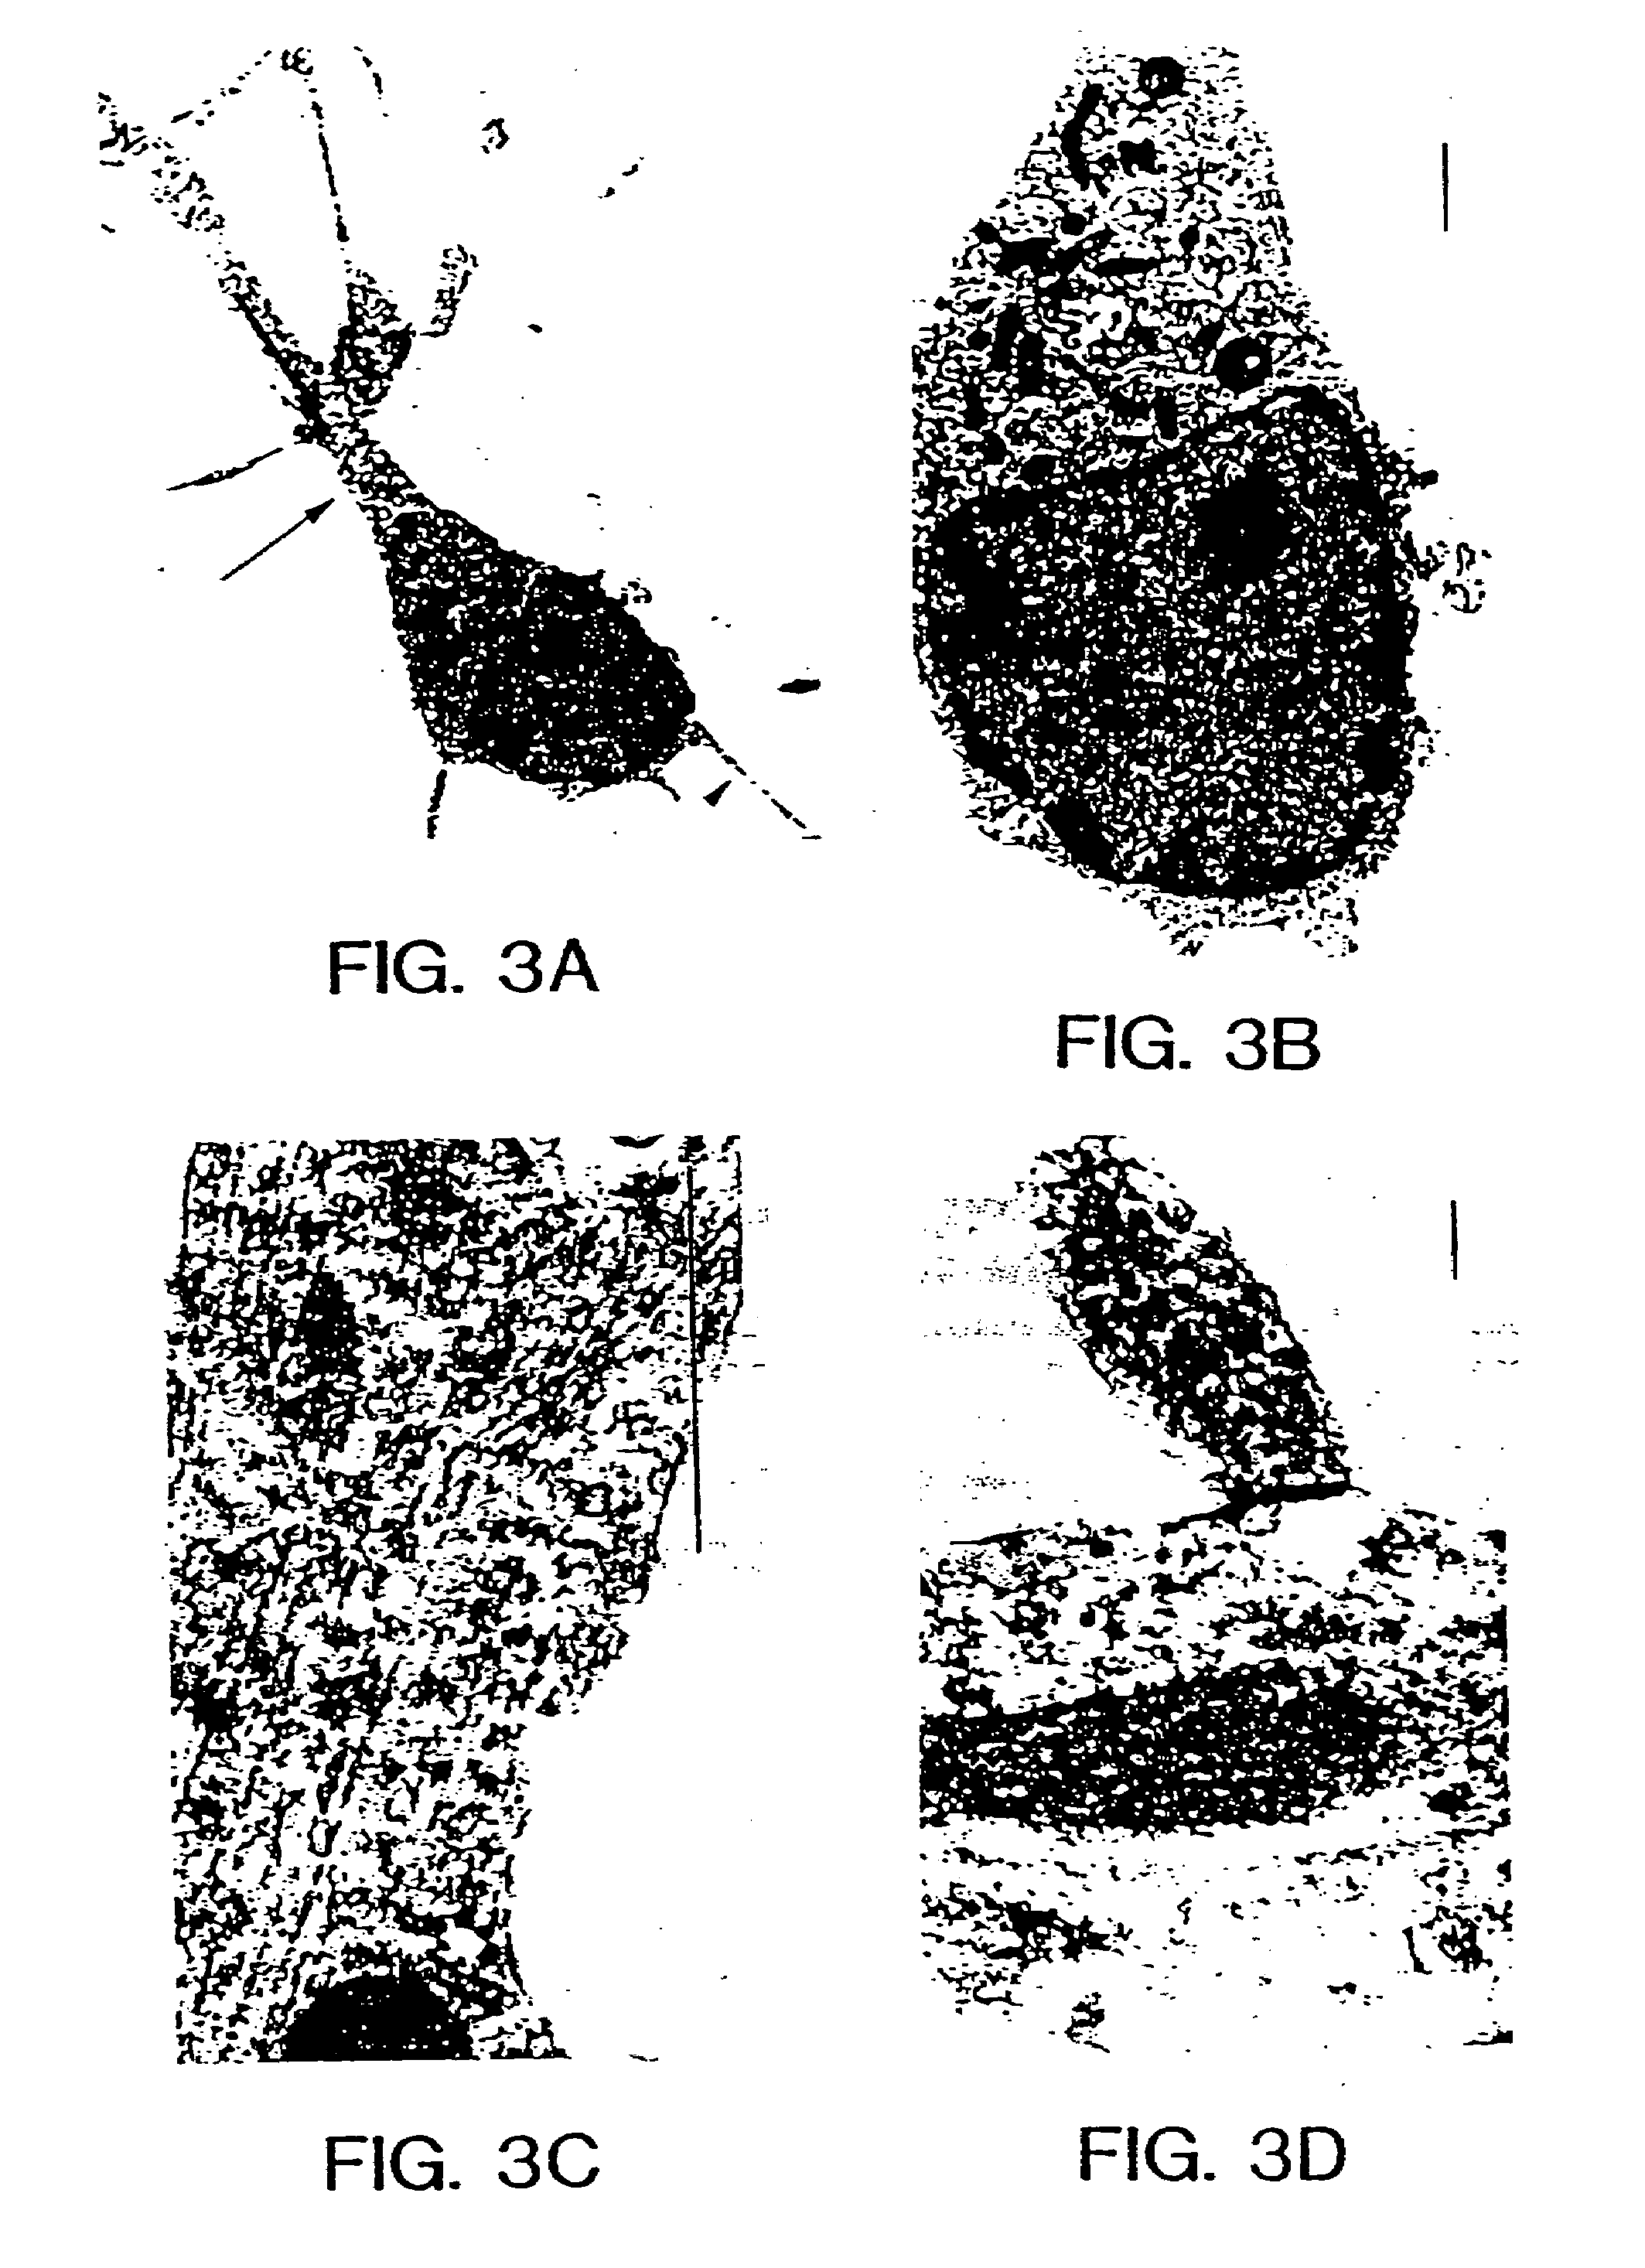 Method for production of neuroblasts